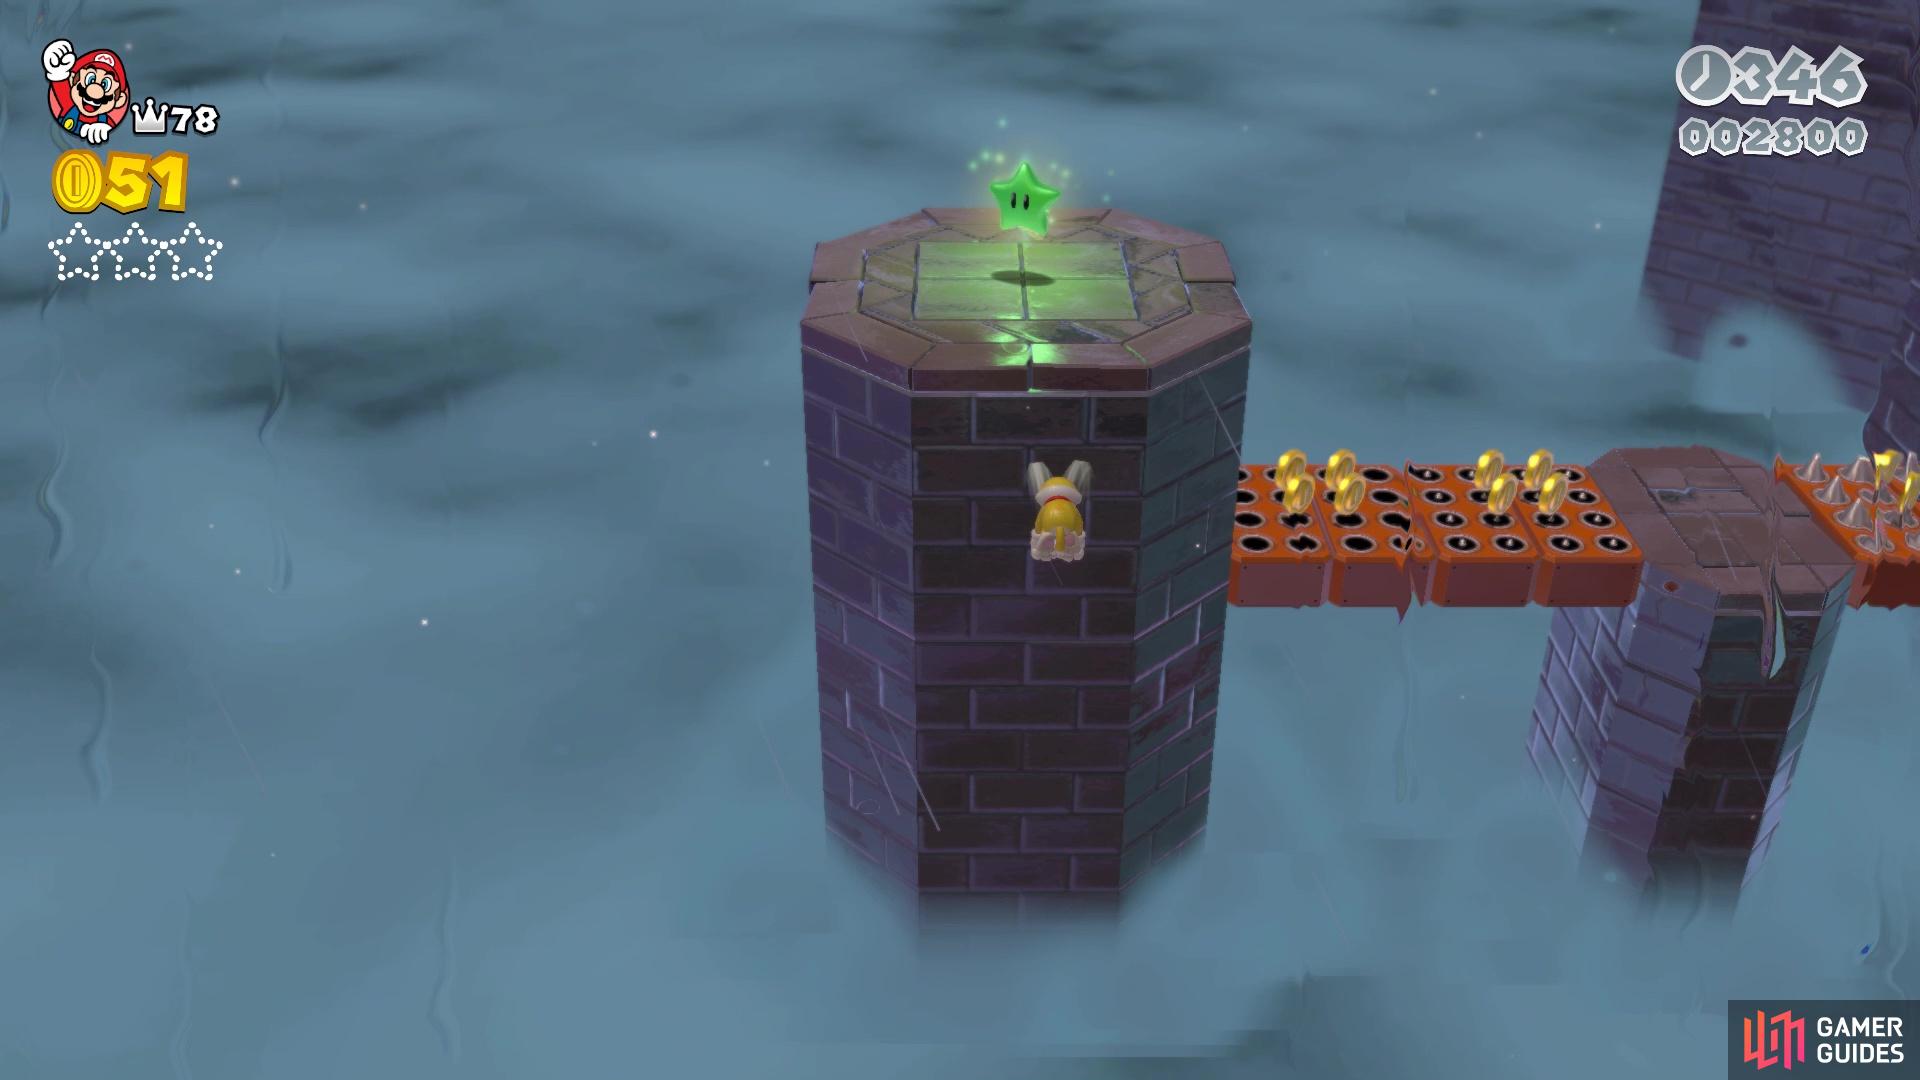 You can use the Cat Suit to jump over and climb the pillar with the first Green Star